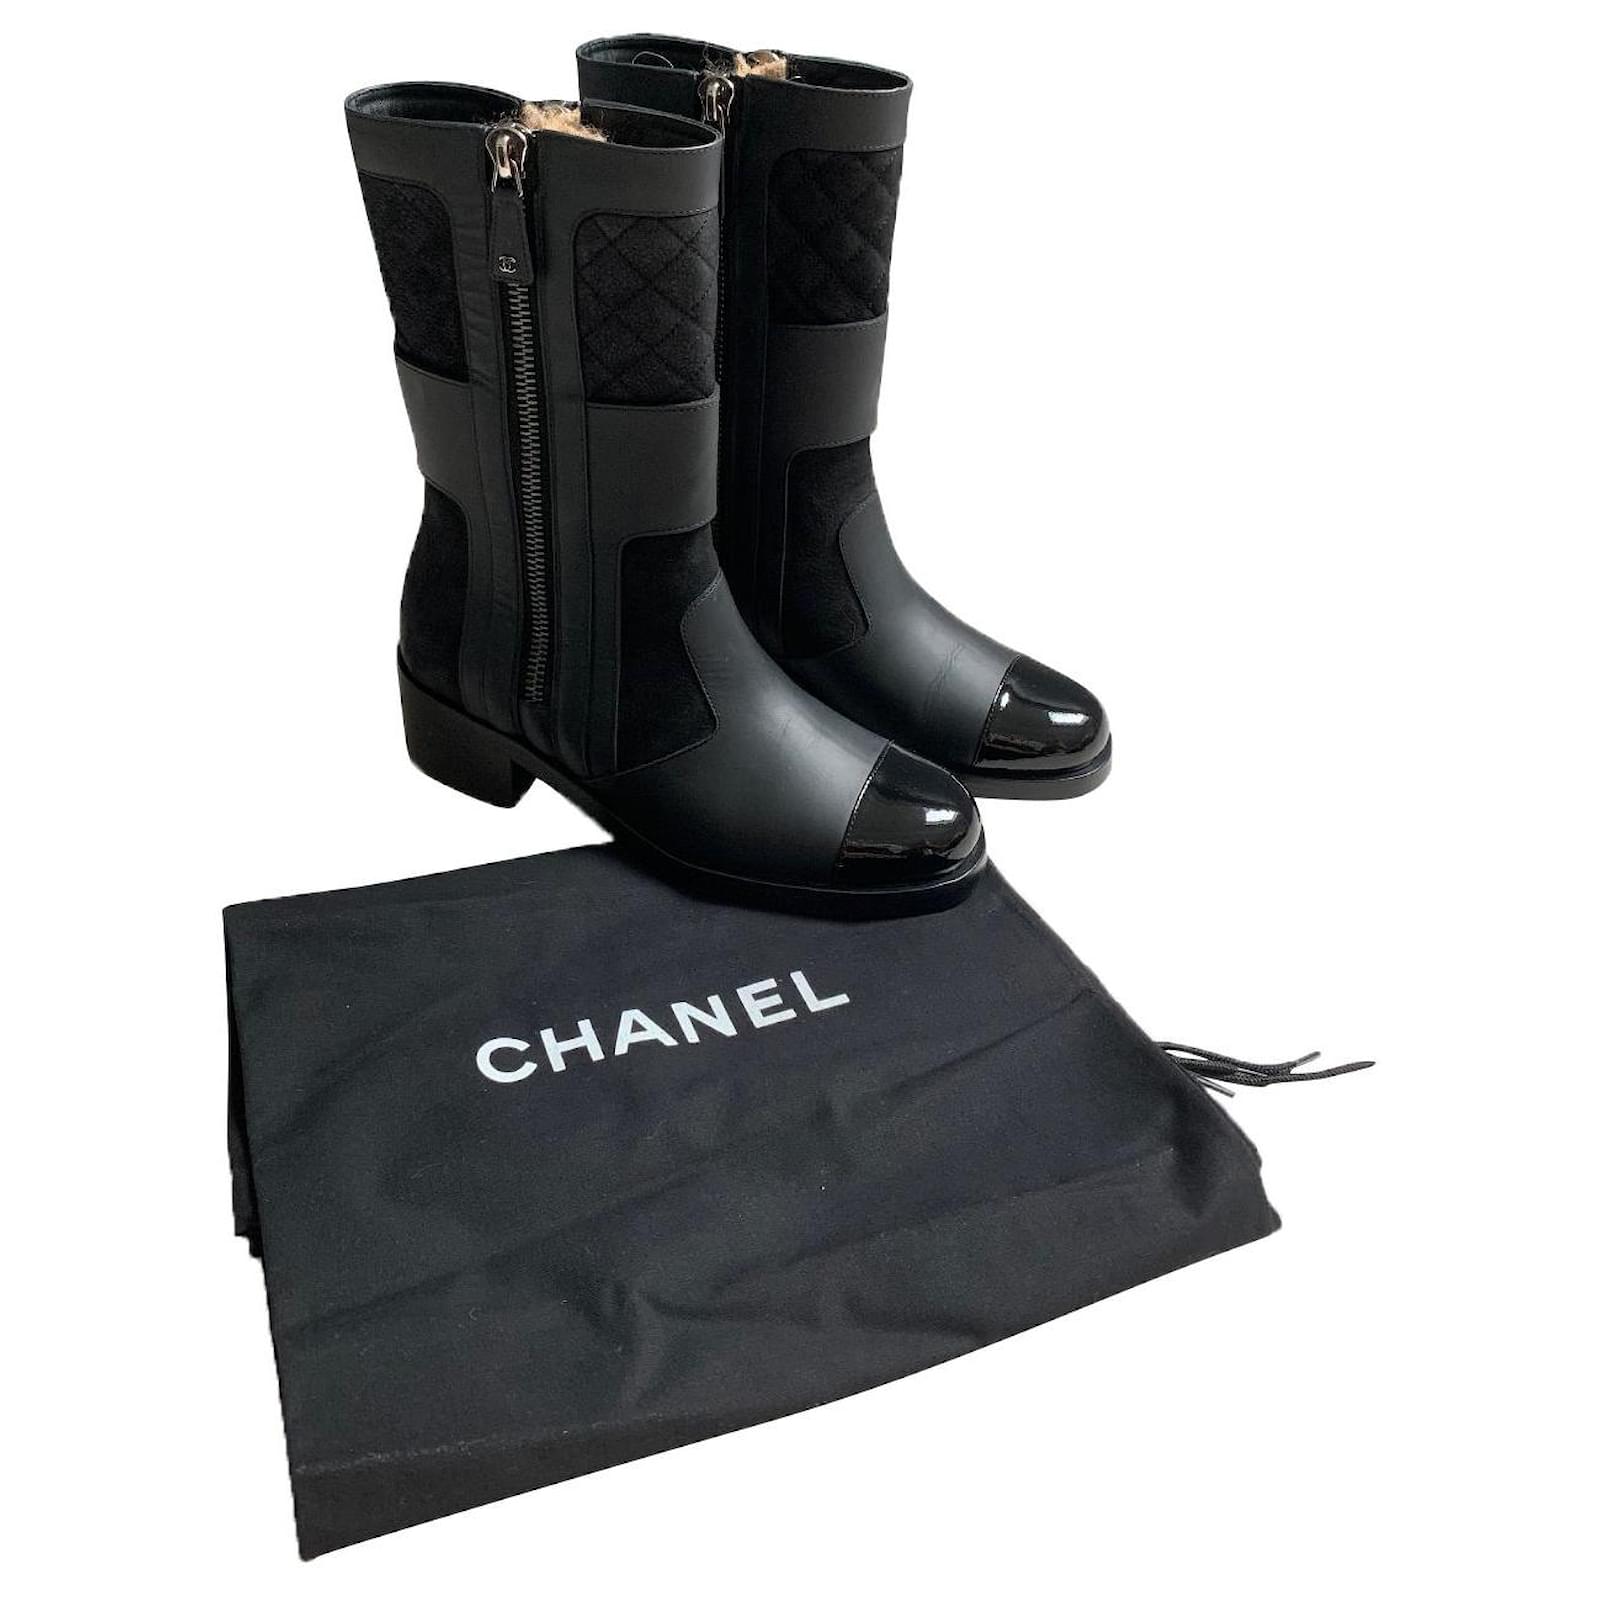 PAIR OF BLACK PATENT AND QUILTED LEATHER BIKER BOOTS, CHANEL